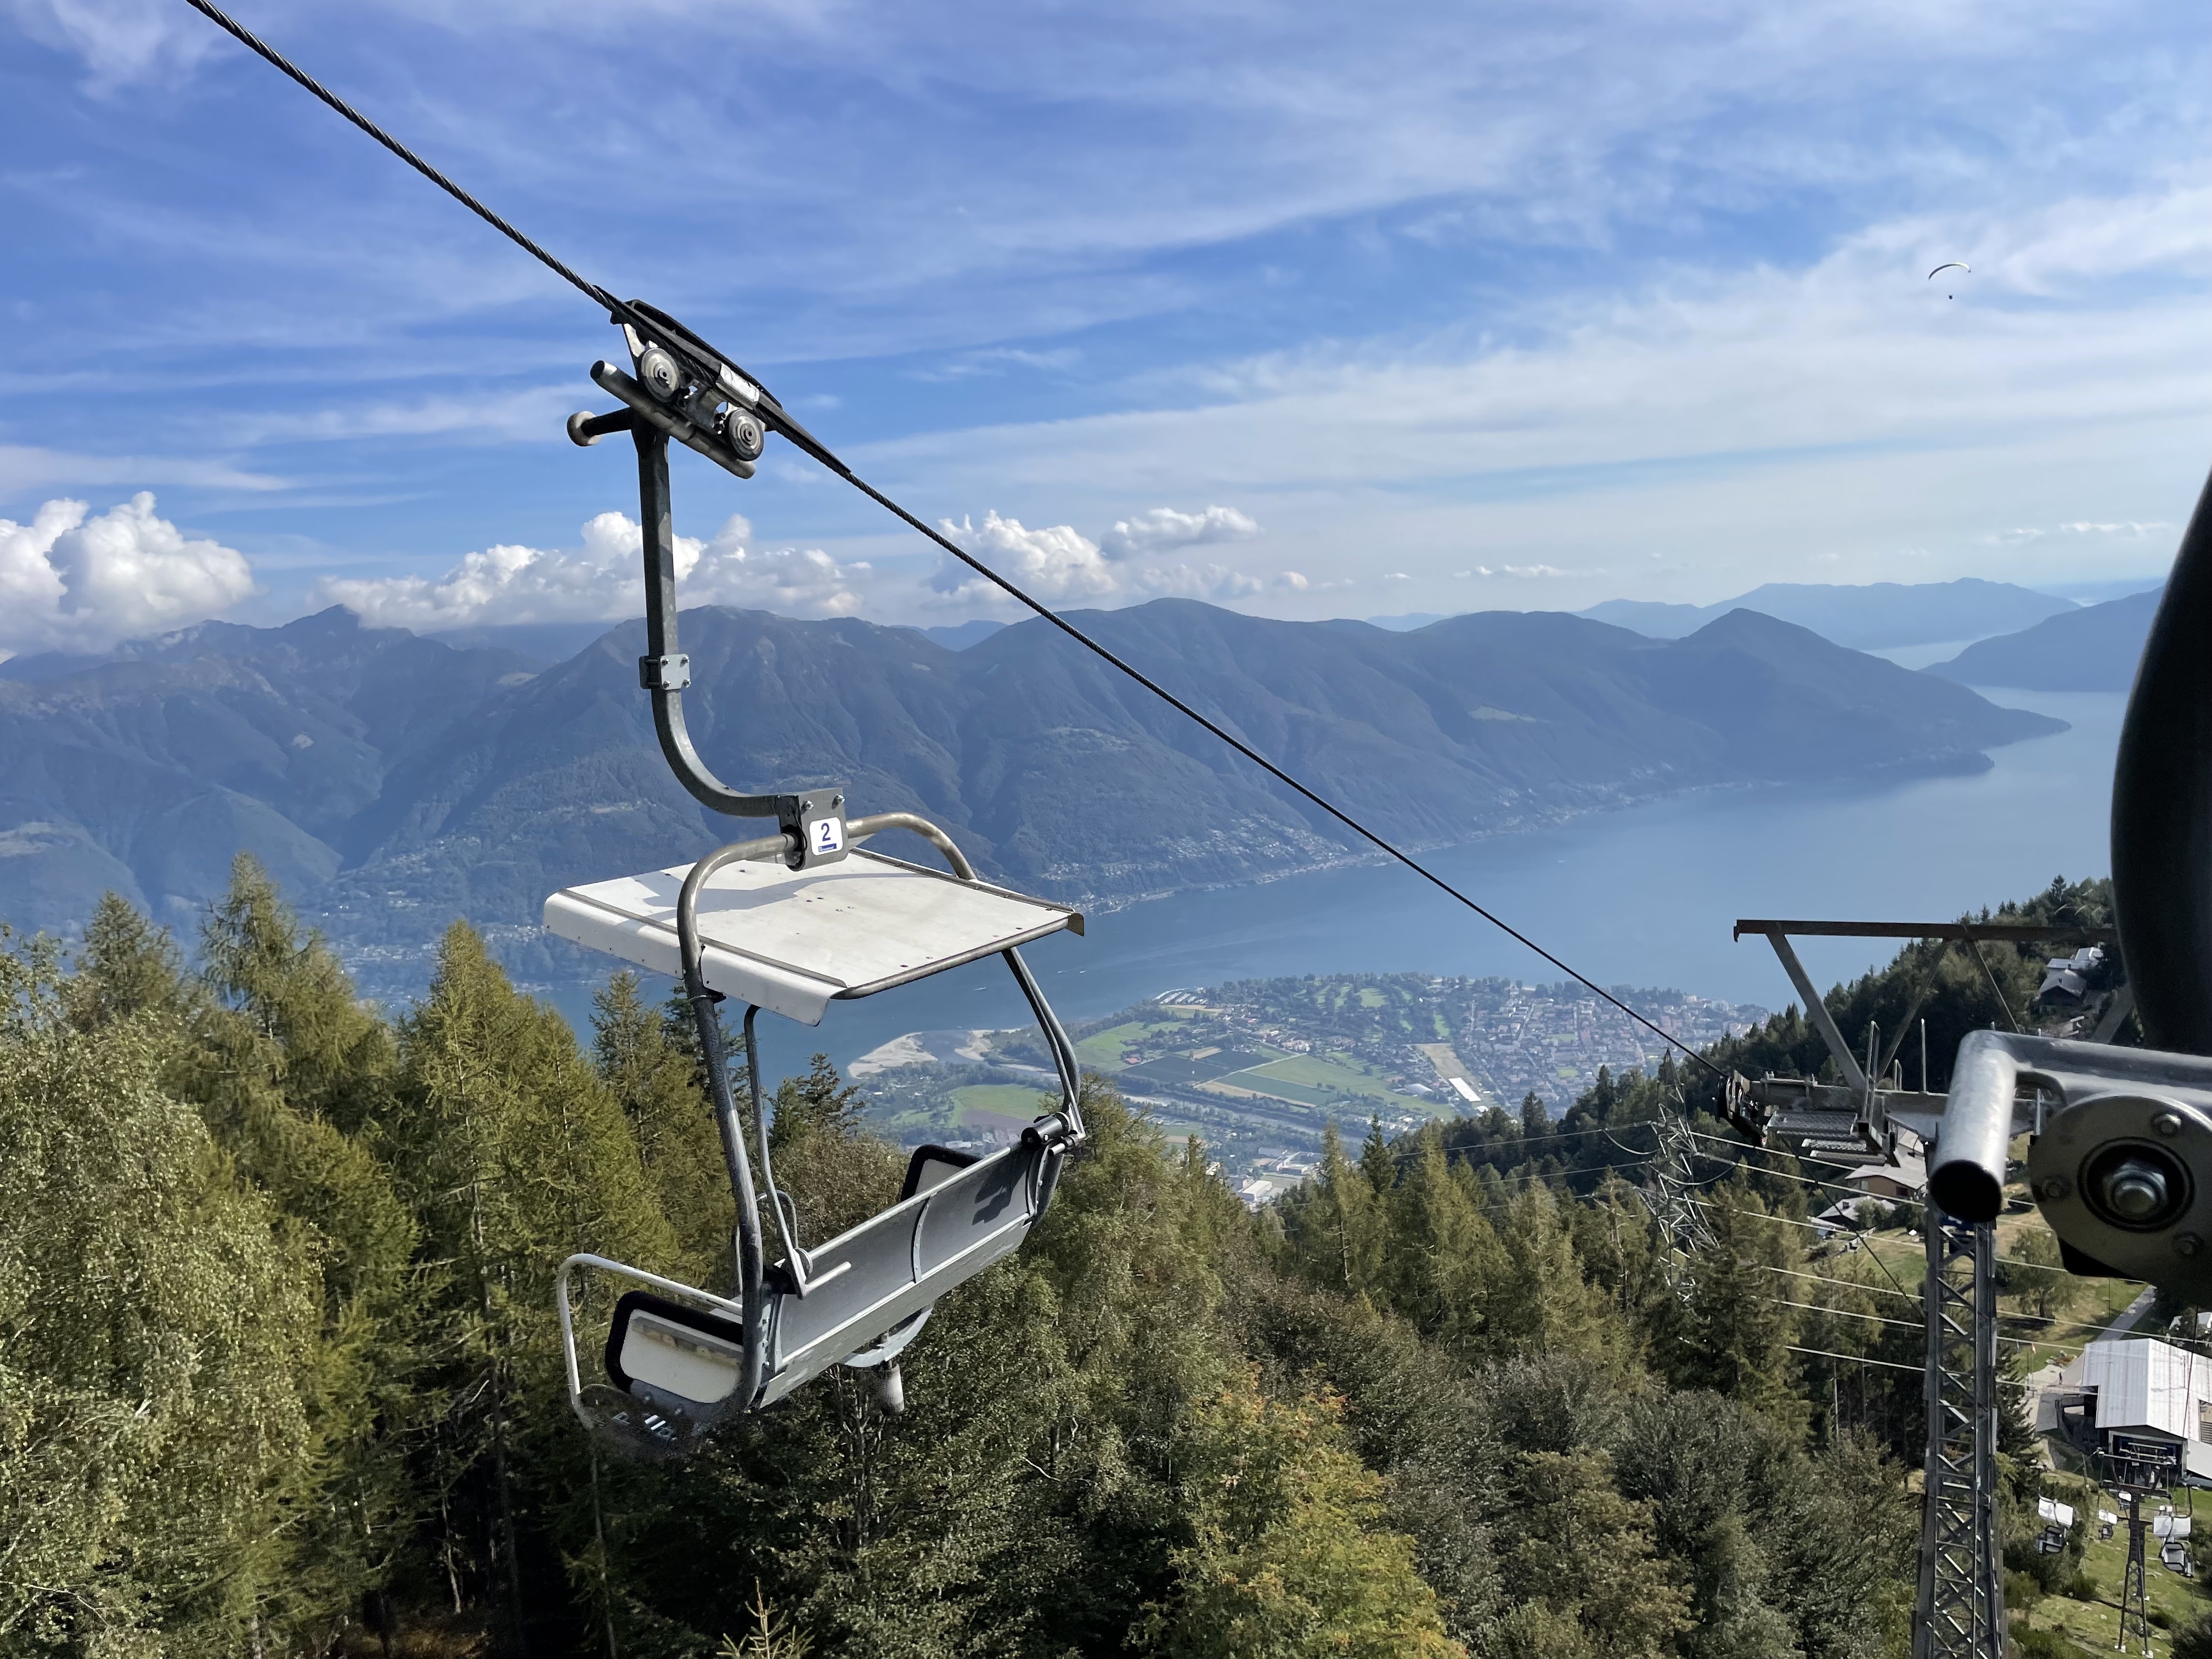 Image overlooking Locarno